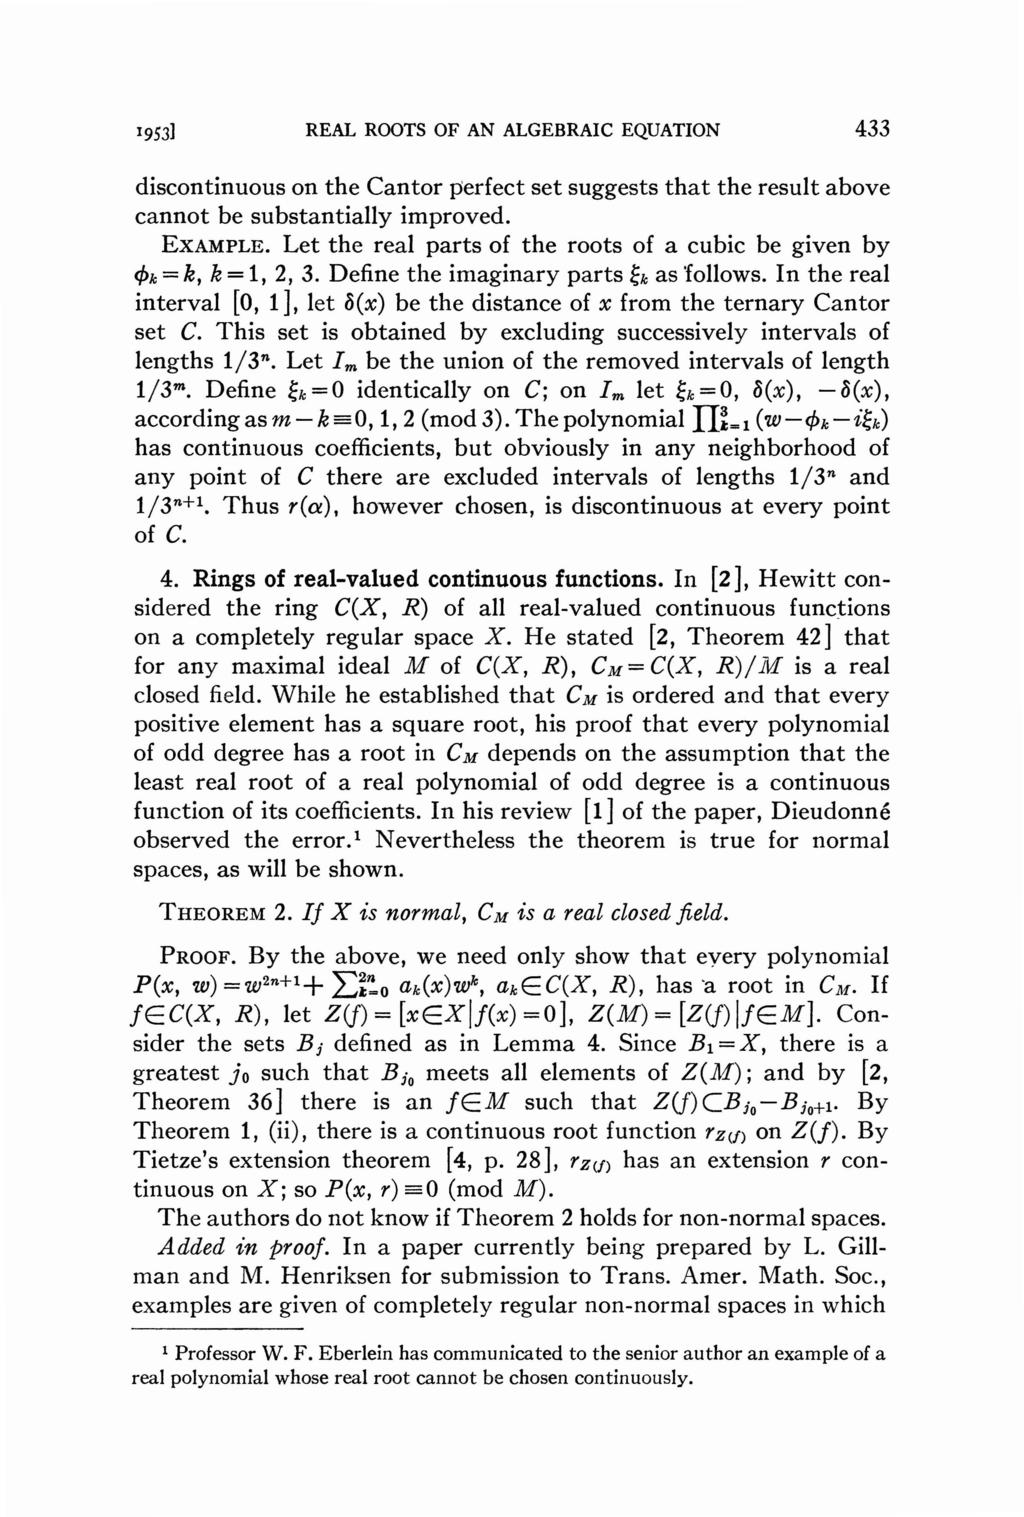 1953] REAL ROOTS OF AN ALGEBRAIC EQUATION 433 discontinuous on the Cantor perfect set suggests that the result above cannot be substantially improved. EXAMPLE.